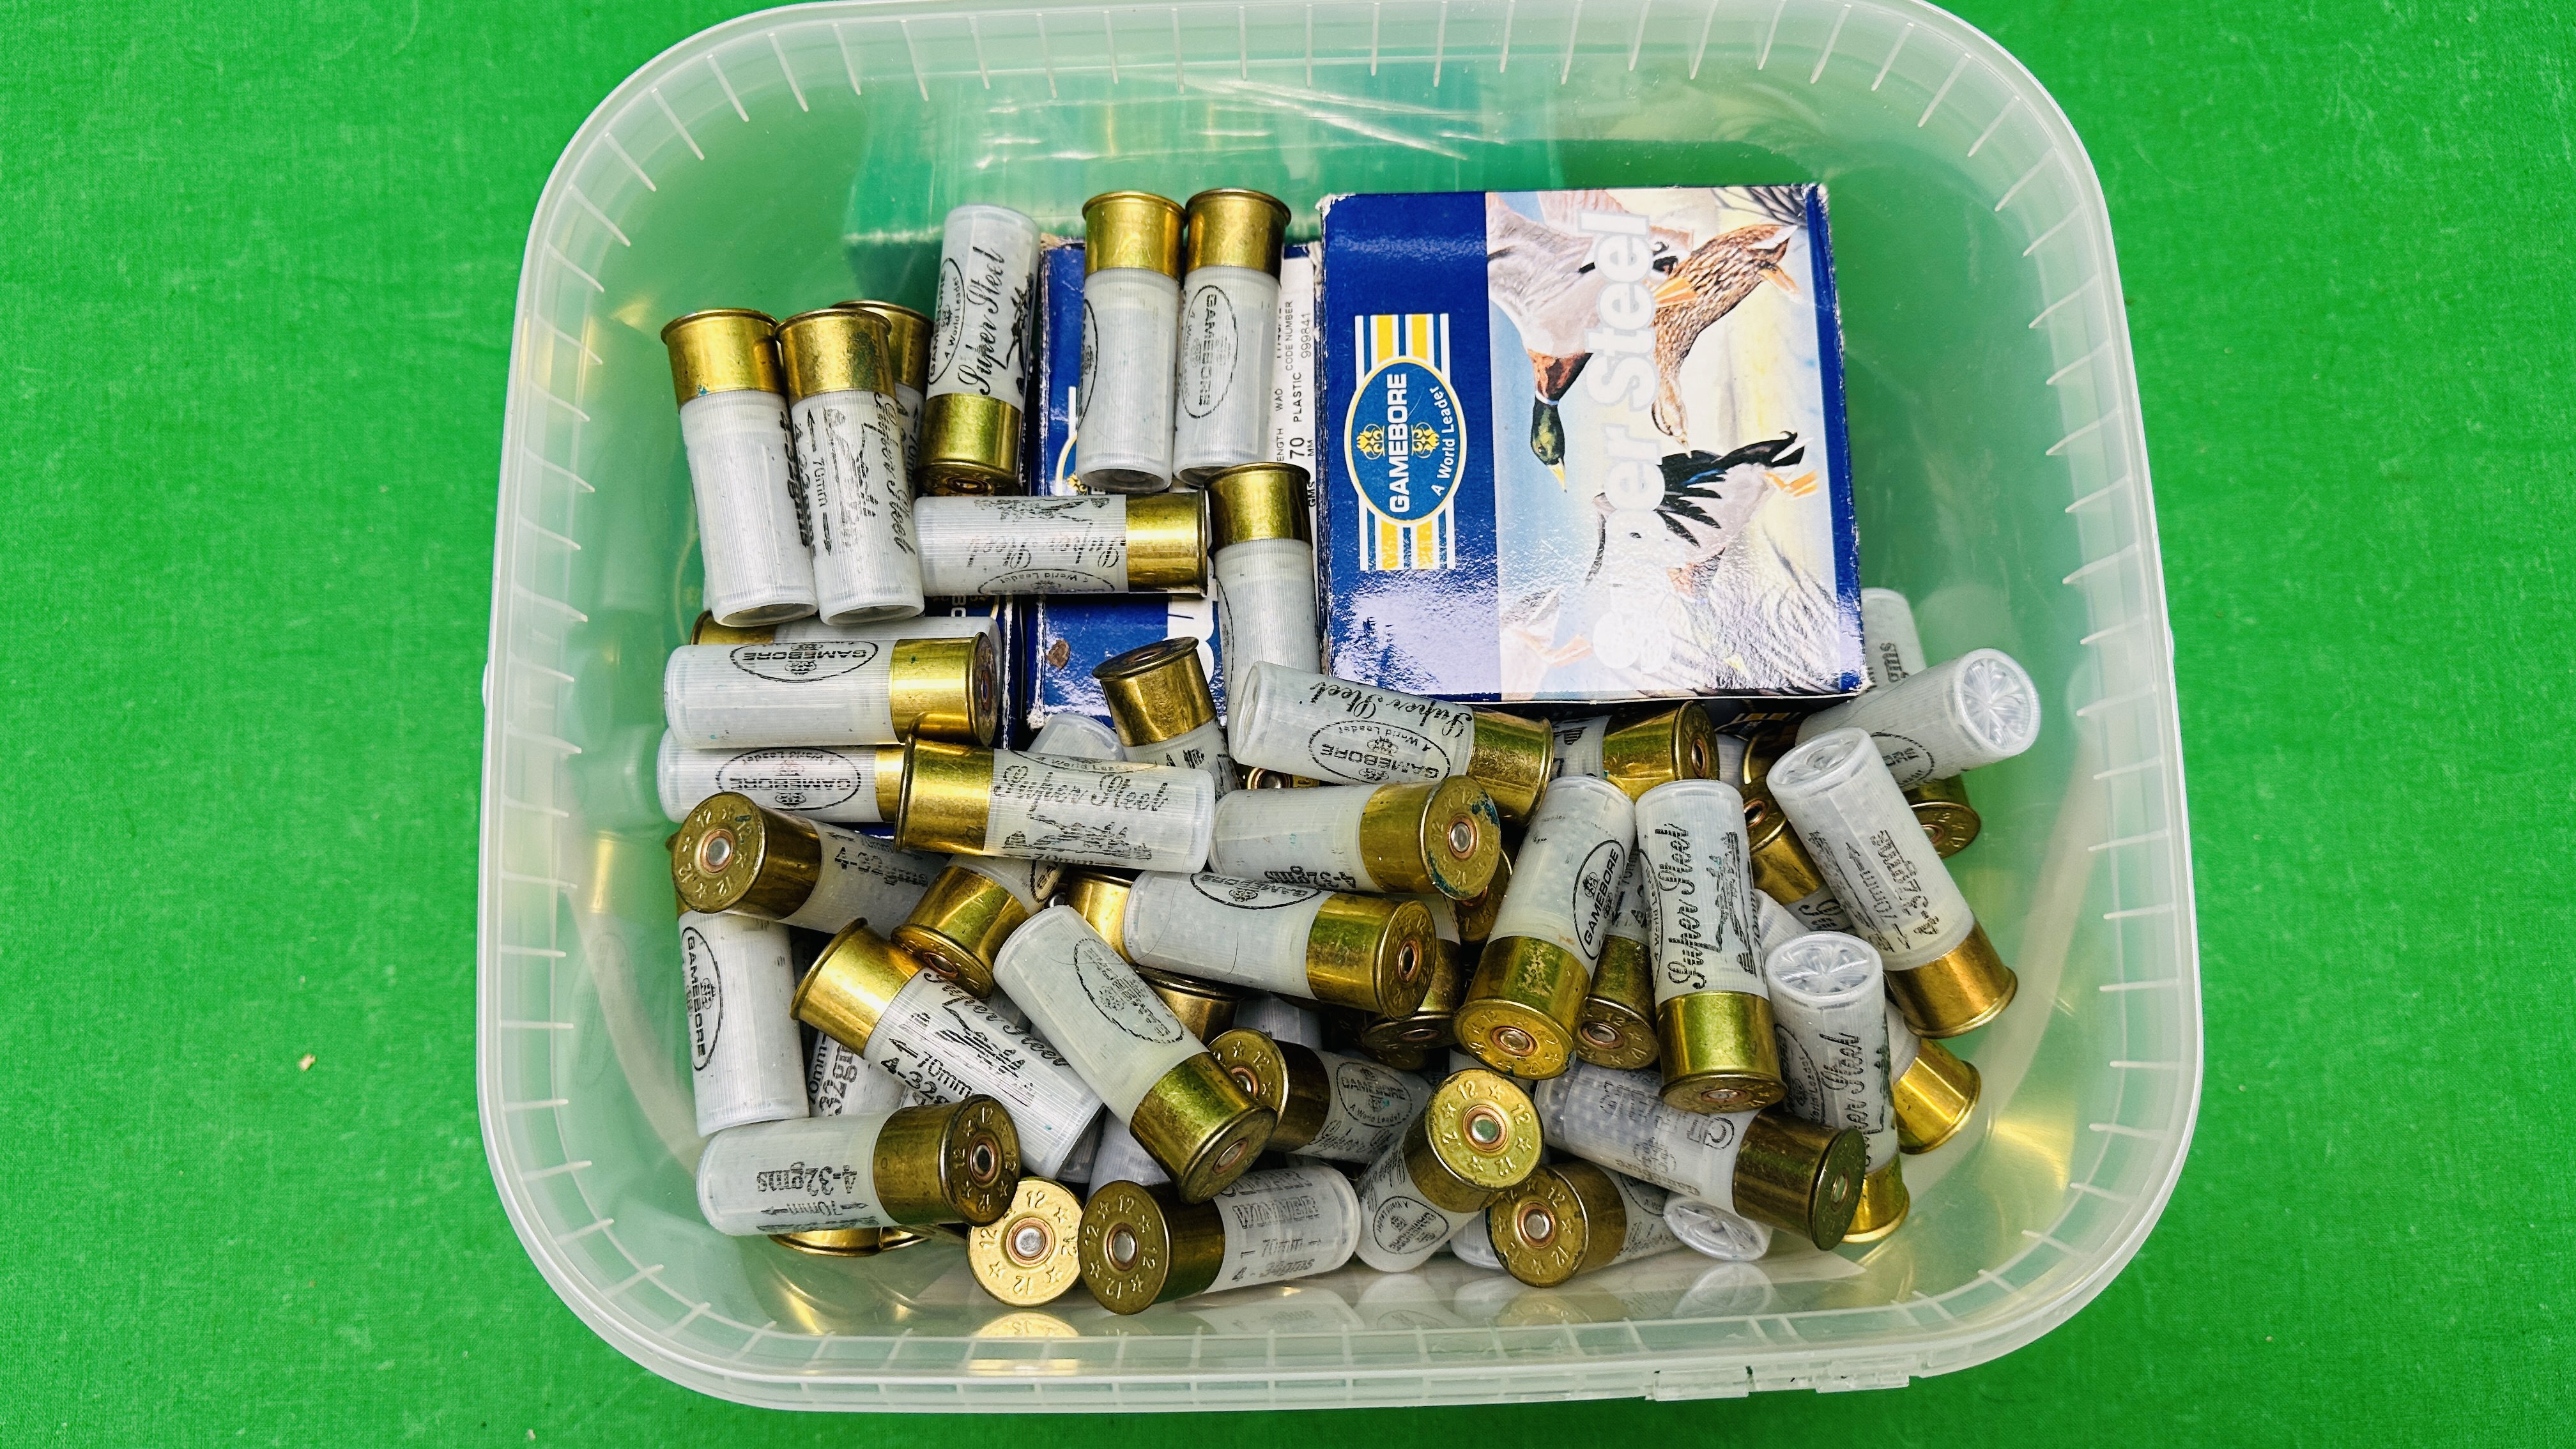 216 X GAMEBORE 12 GAUGE SUPER STEEL 32GM 4 SHOT CARTRIDGES - (TO BE COLLECTED IN PERSON BY LICENCE